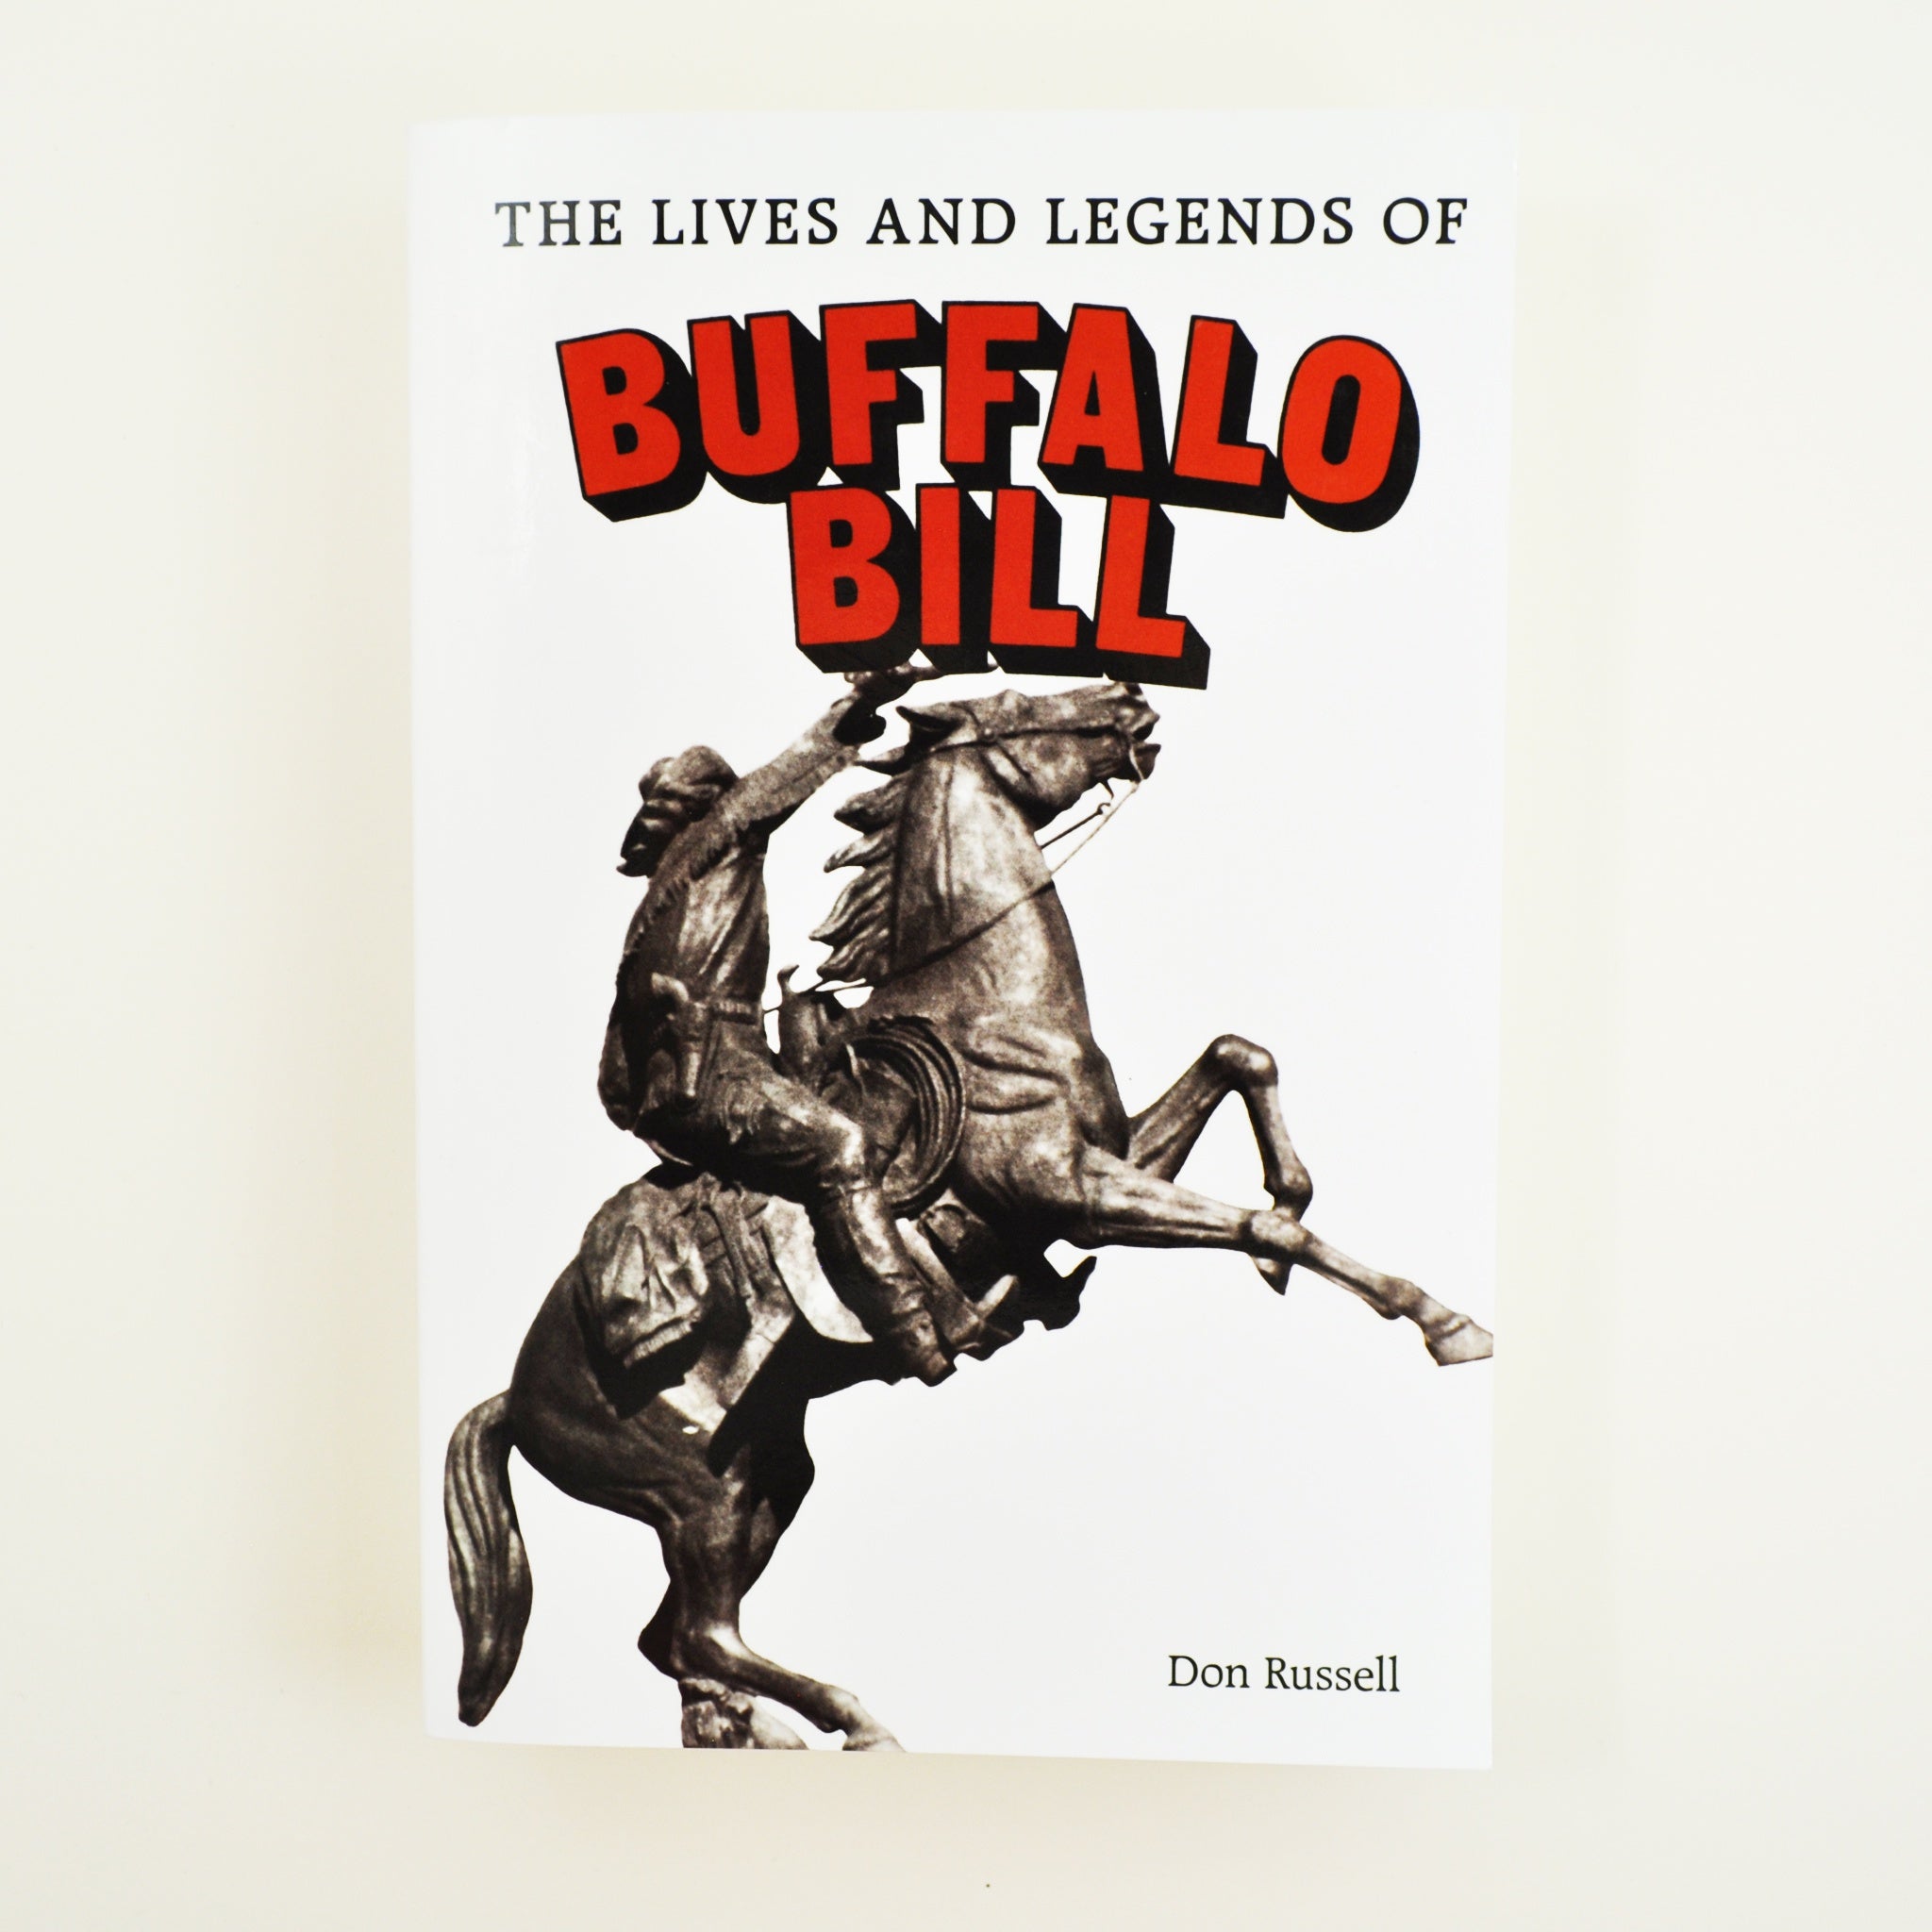 BK 1 THE LIVES AND LEGENDS OF BUFFALO BILL BY DON RUSSELL #21012169 D2 MAR24